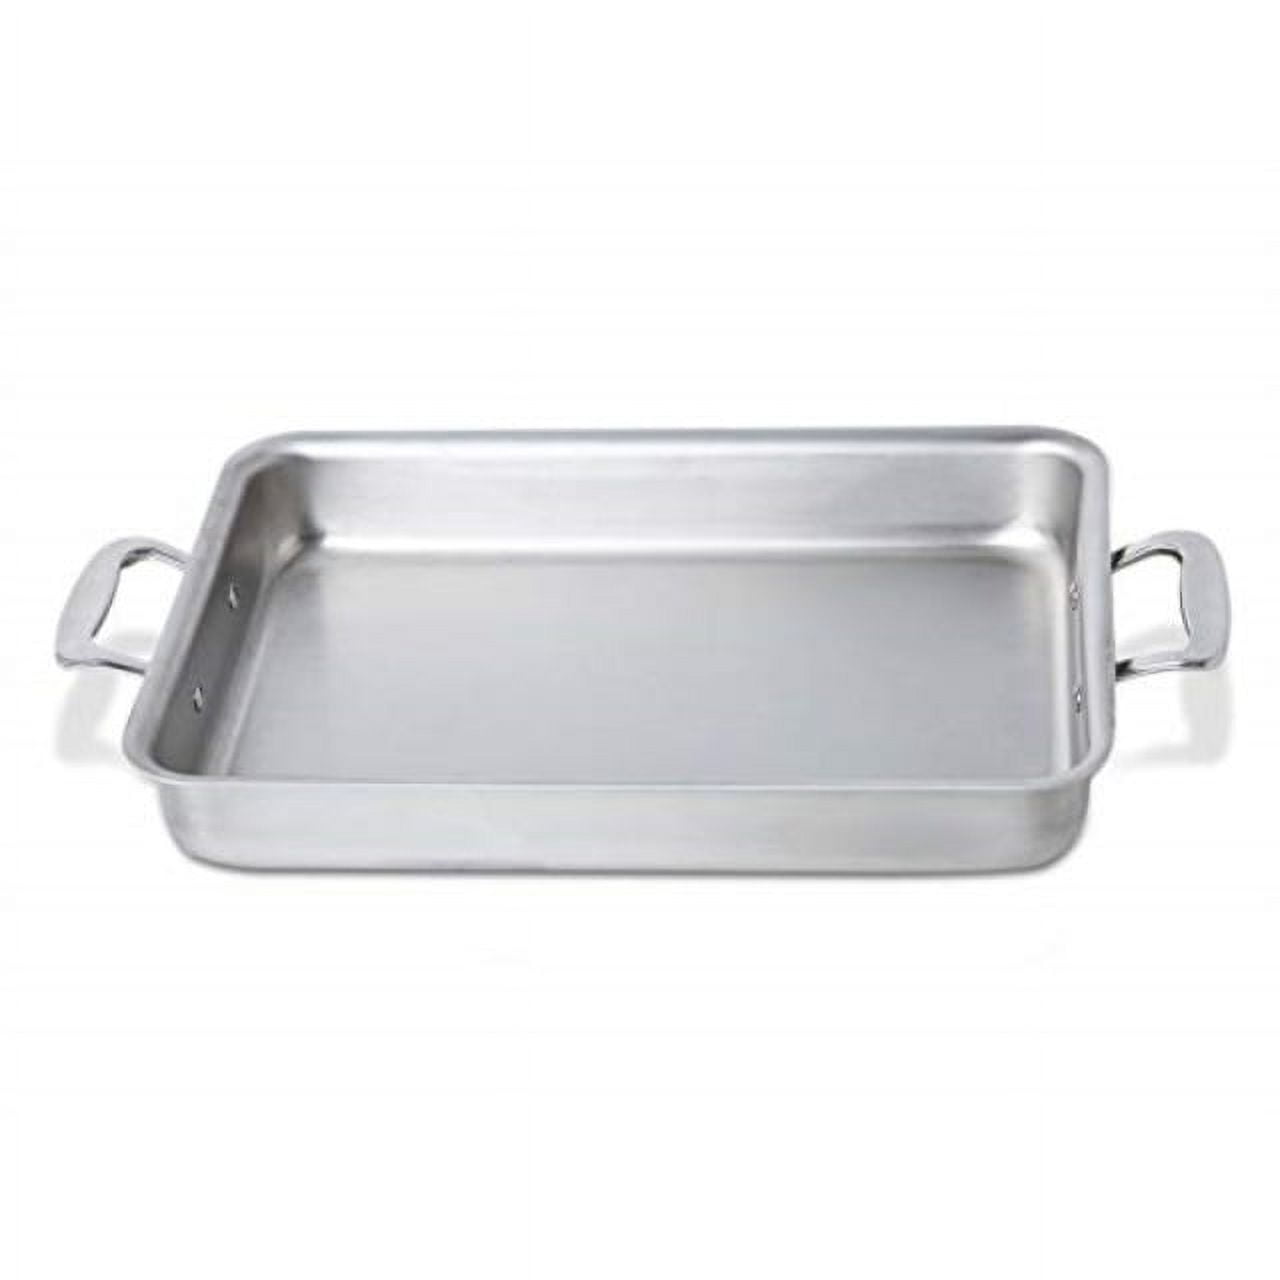 360 Stainless Steel Baking Pan 9x13, Handcrafted in the USA, 5 Ply,  Surgical Grade Stainless Bakeware, Professional Grade Casserole Dish,  Roasting Pan